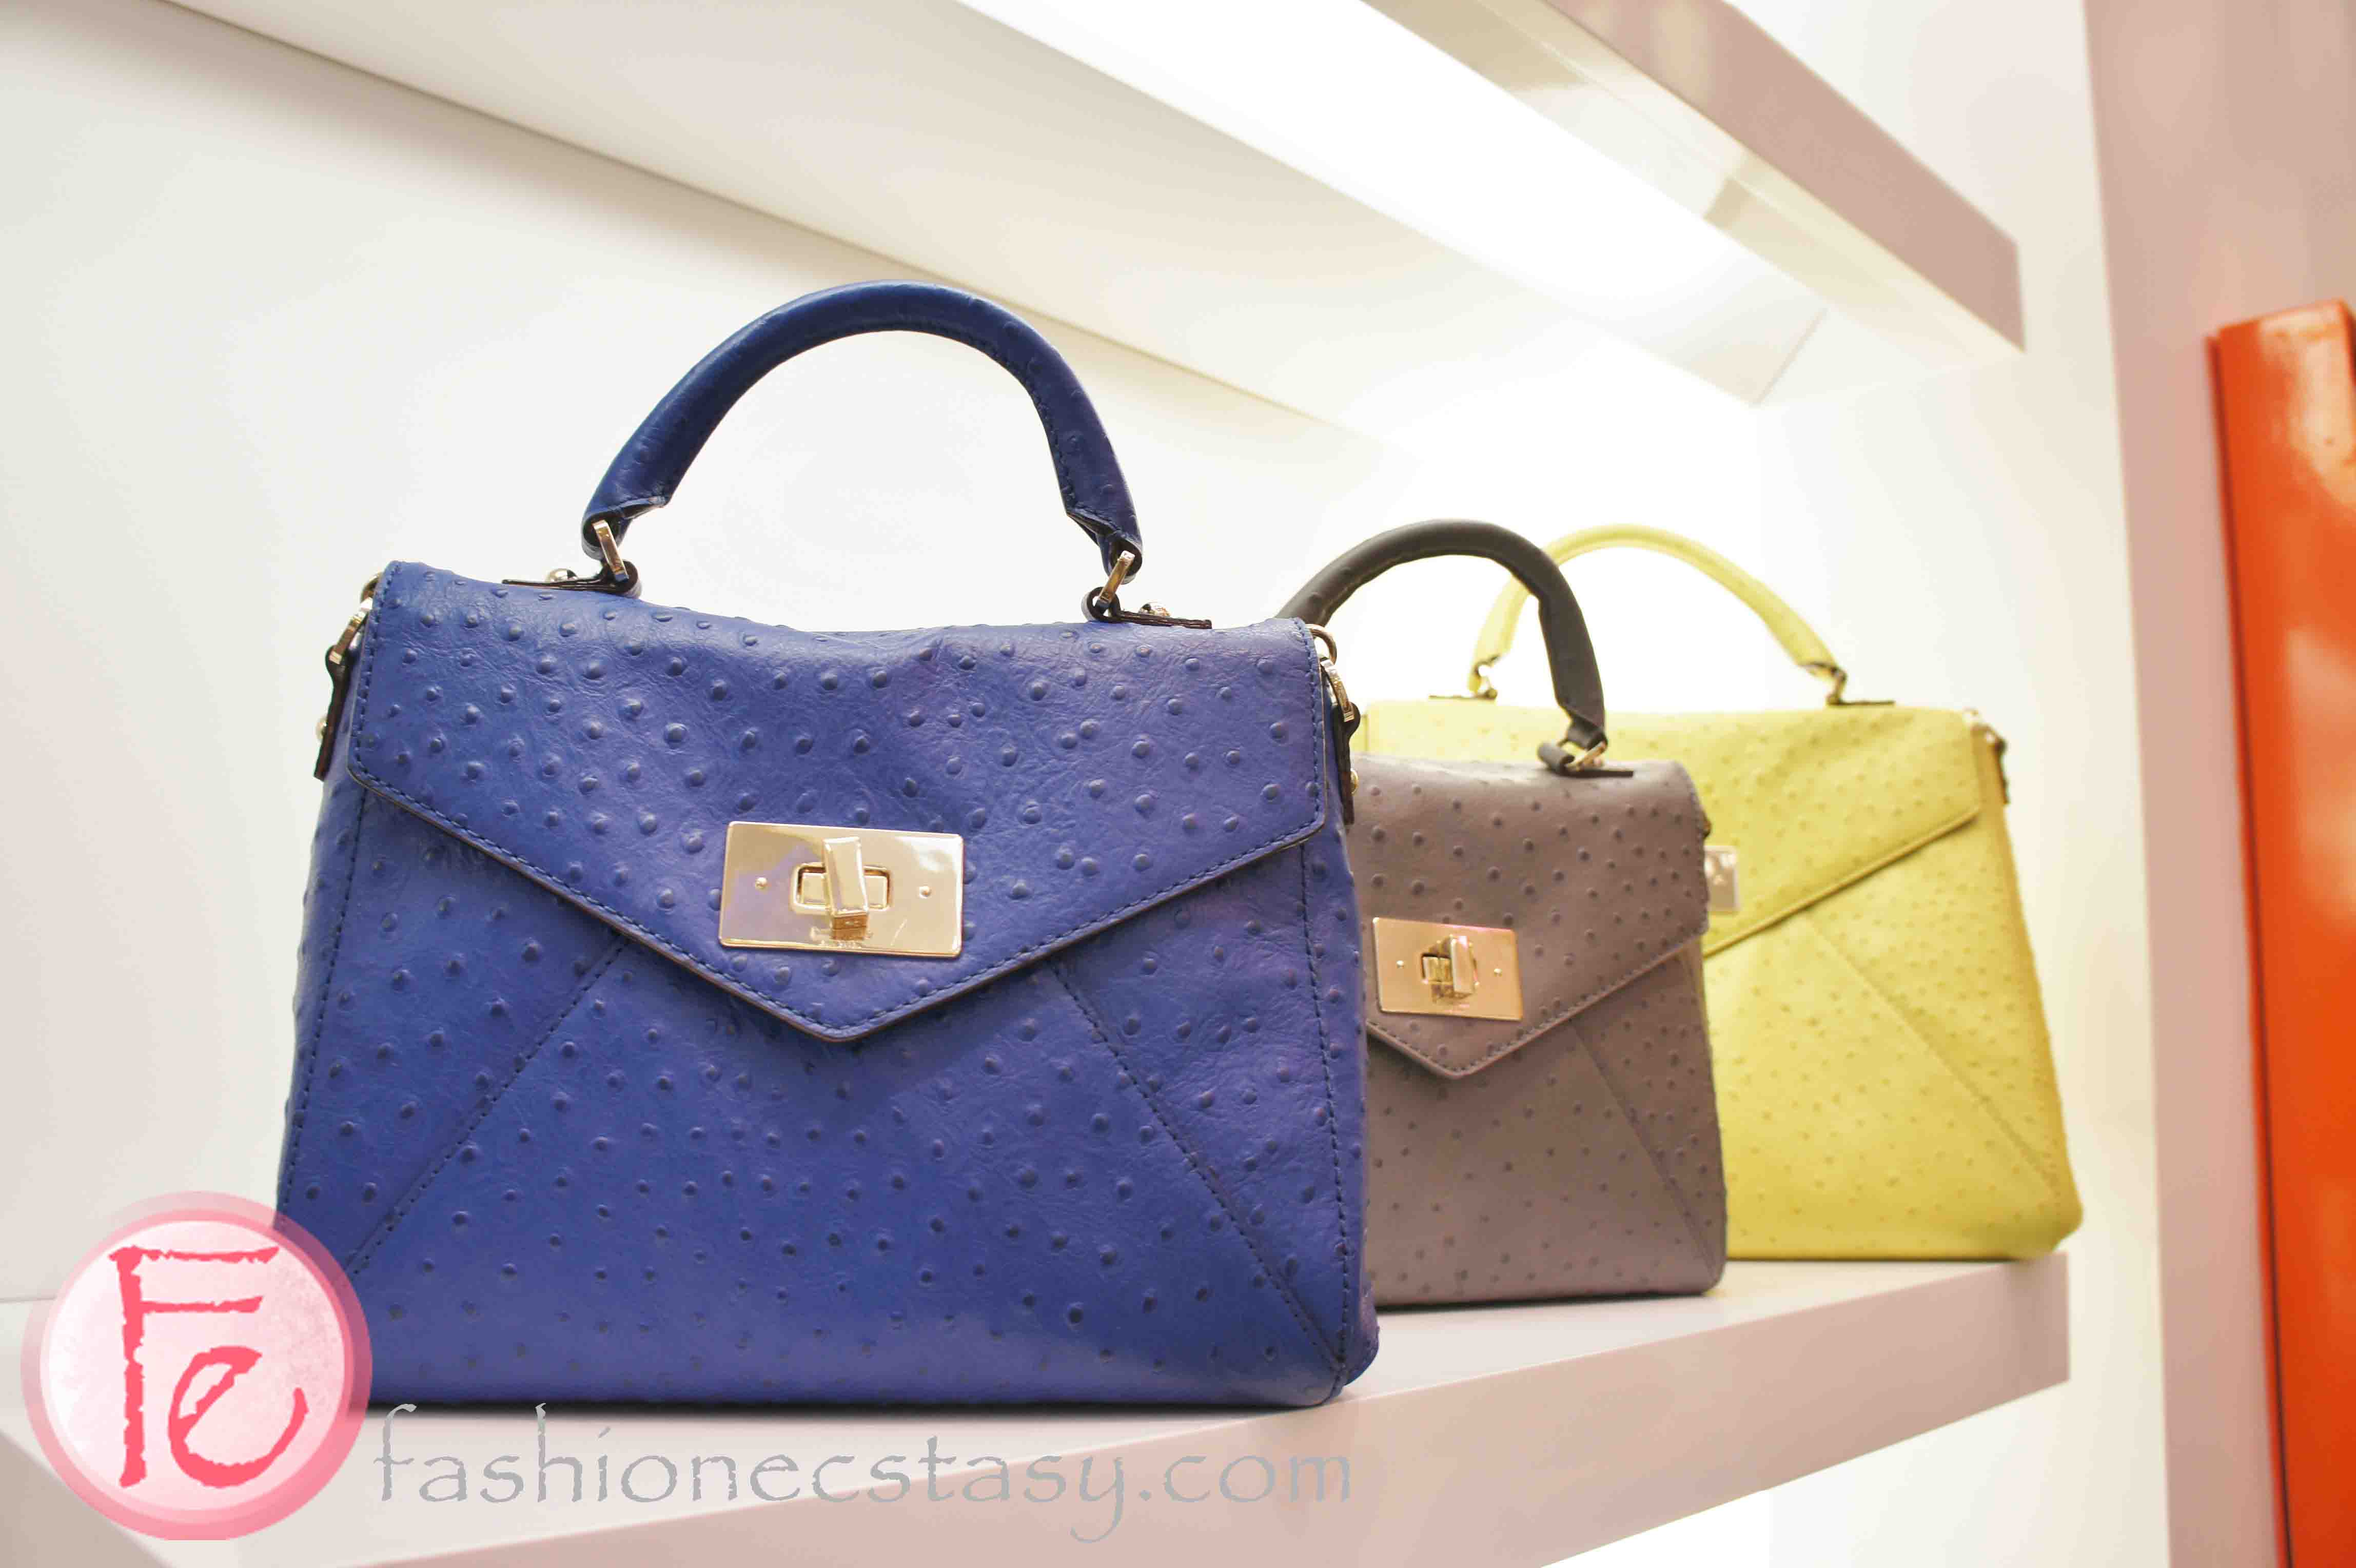 ostrich embossed cowhide leather hand bag - Kate Spade New York Grand Opening Party at Yorkdale Shopping Centre, Toronto